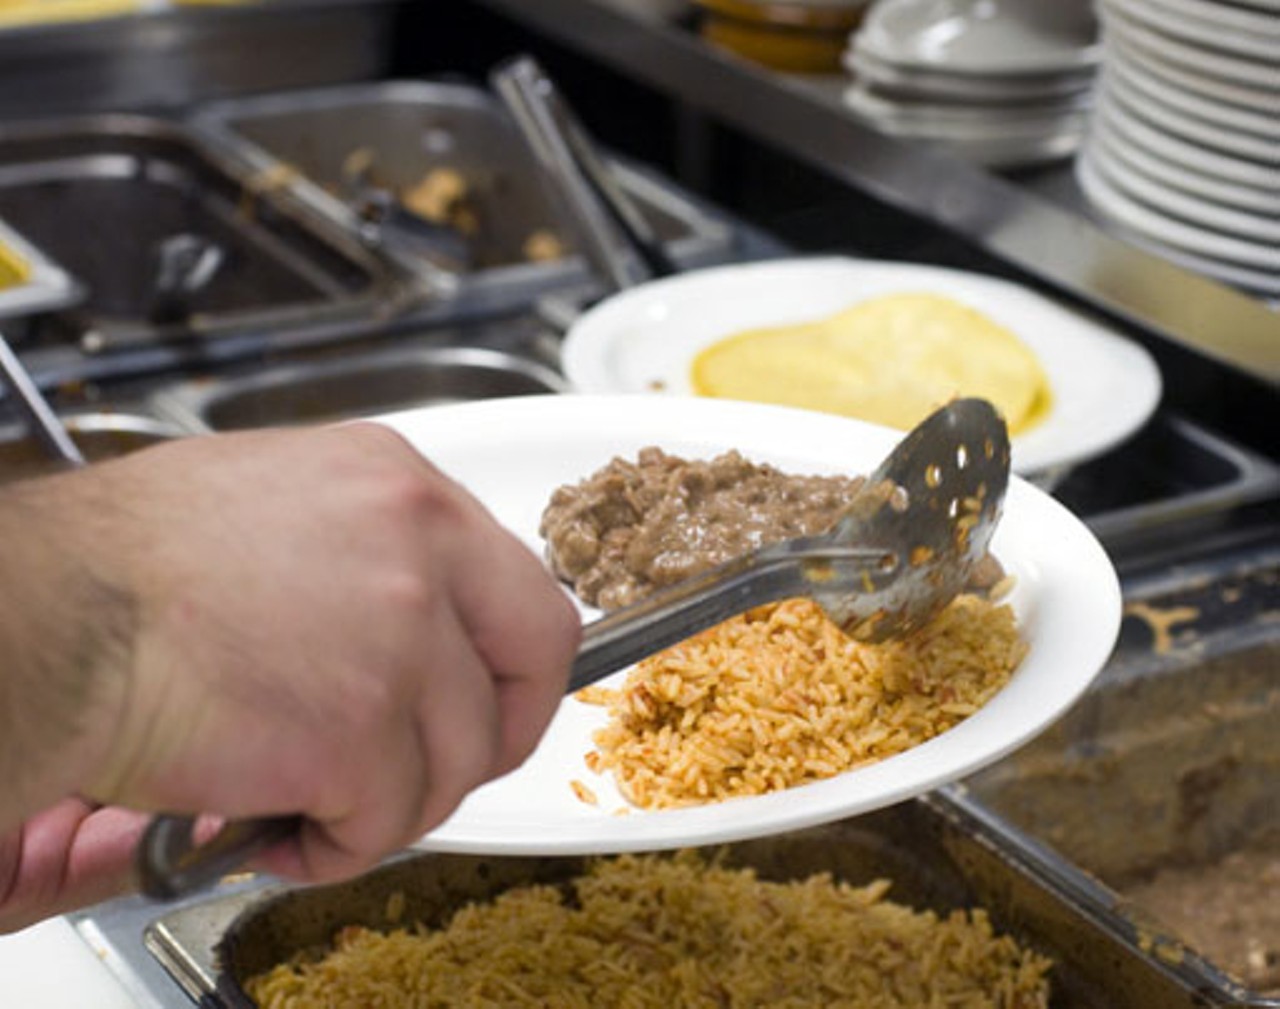 Preparing the plate with rice and beans.